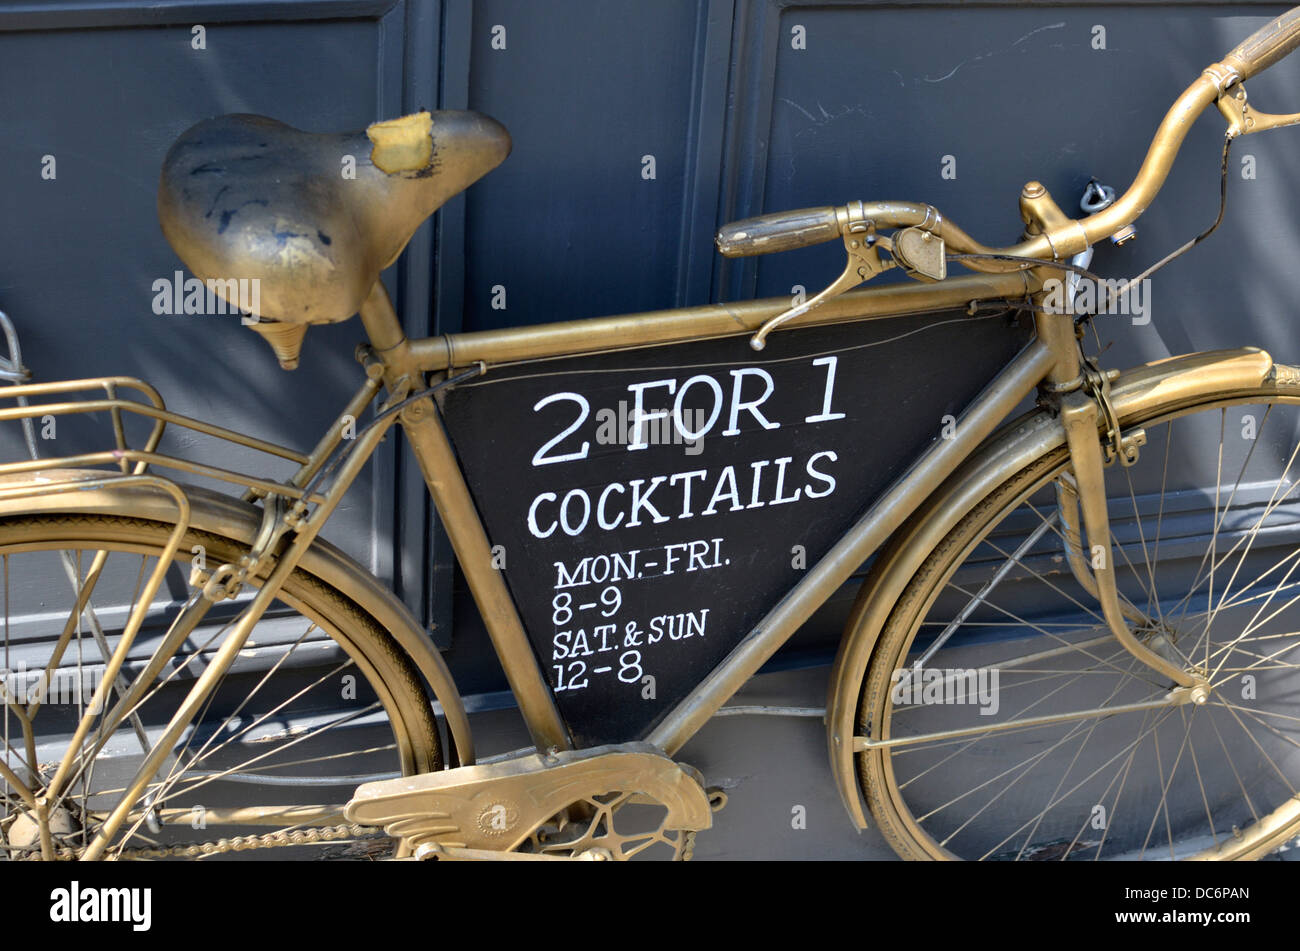 '2 for 1 Cocktails' sign on an old bicycle outside a bar, London, UK Stock Photo